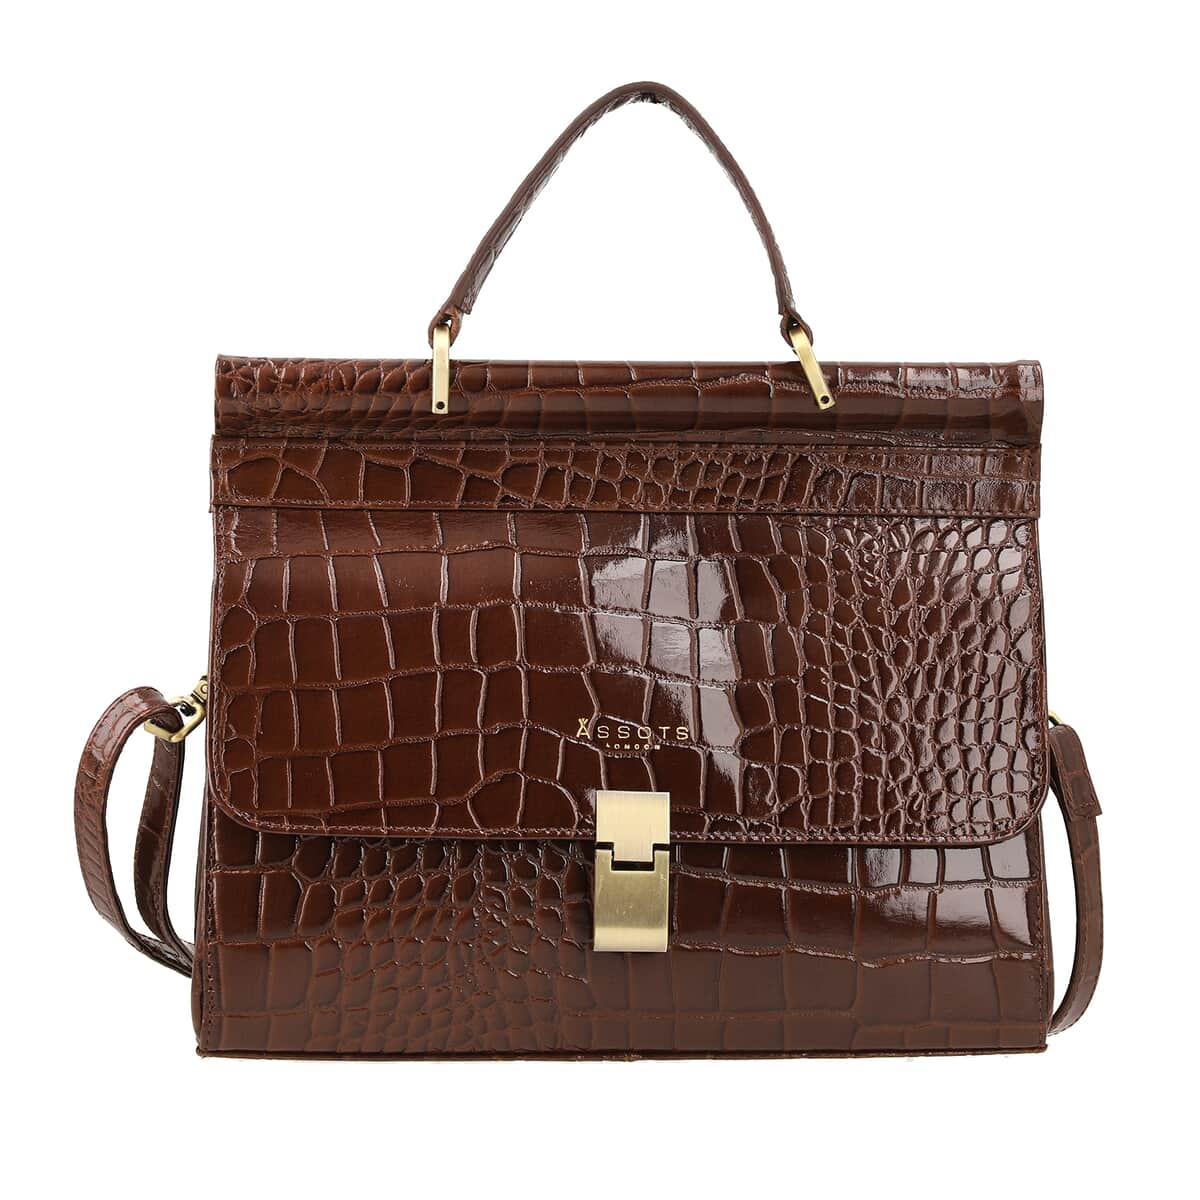 Assots London Brown Genuine Leather Croco Embossed Satchel Bag For Women With Adjustable Detachable Shoulder Strap And Button Closure (11.61X3.54X9.64) image number 0